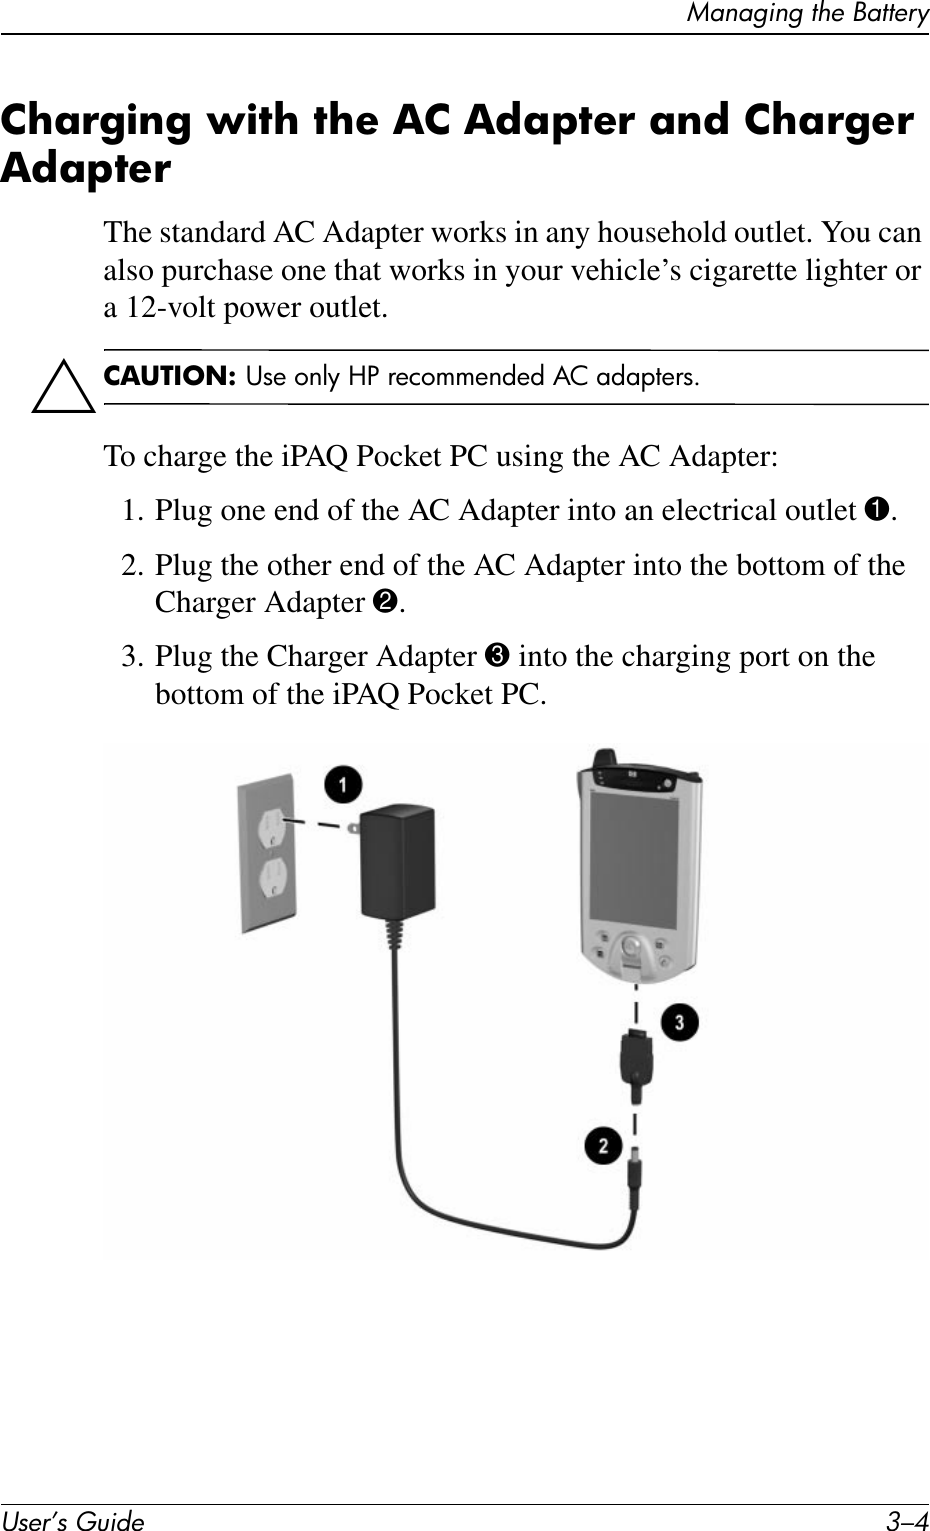 User’s Guide 3–4Managing the BatteryCharging with the AC Adapter and Charger AdapterThe standard AC Adapter works in any household outlet. You can also purchase one that works in your vehicle’s cigarette lighter or a 12-volt power outlet.ÄCAUTION: Use only HP recommended AC adapters.To charge the iPAQ Pocket PC using the AC Adapter:1. Plug one end of the AC Adapter into an electrical outlet 1.2. Plug the other end of the AC Adapter into the bottom of the Charger Adapter 2.3. Plug the Charger Adapter 3 into the charging port on the bottom of the iPAQ Pocket PC.